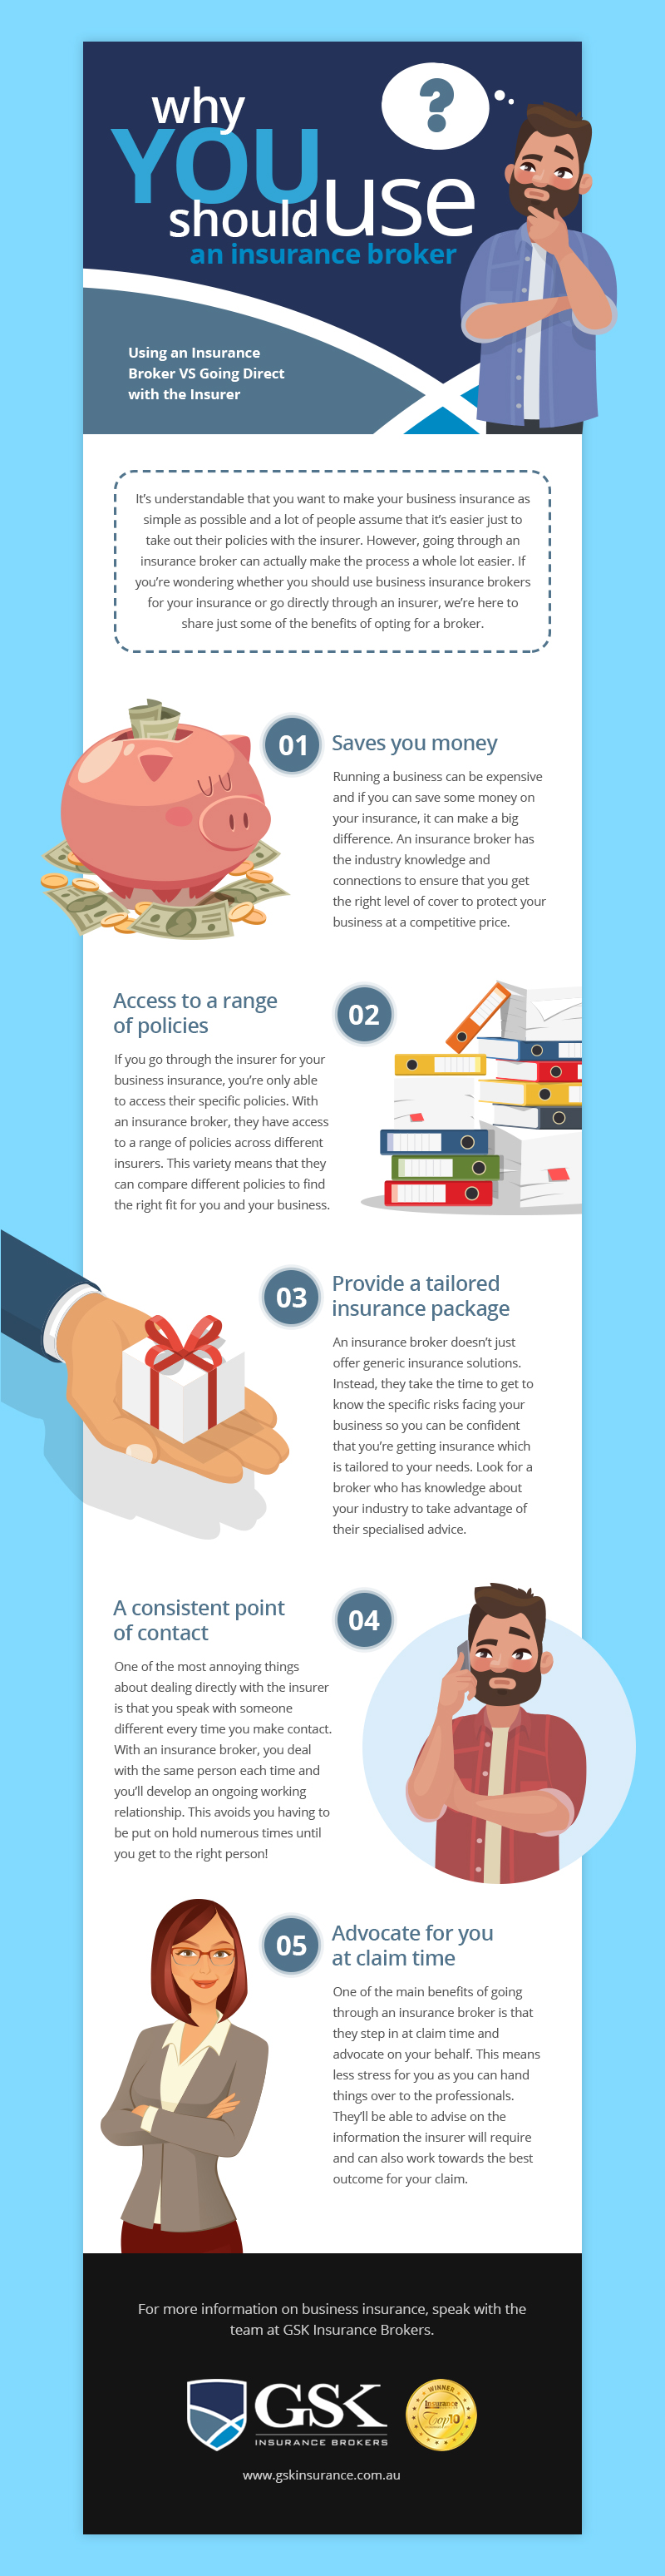 Why you should use an insurance broker infographic